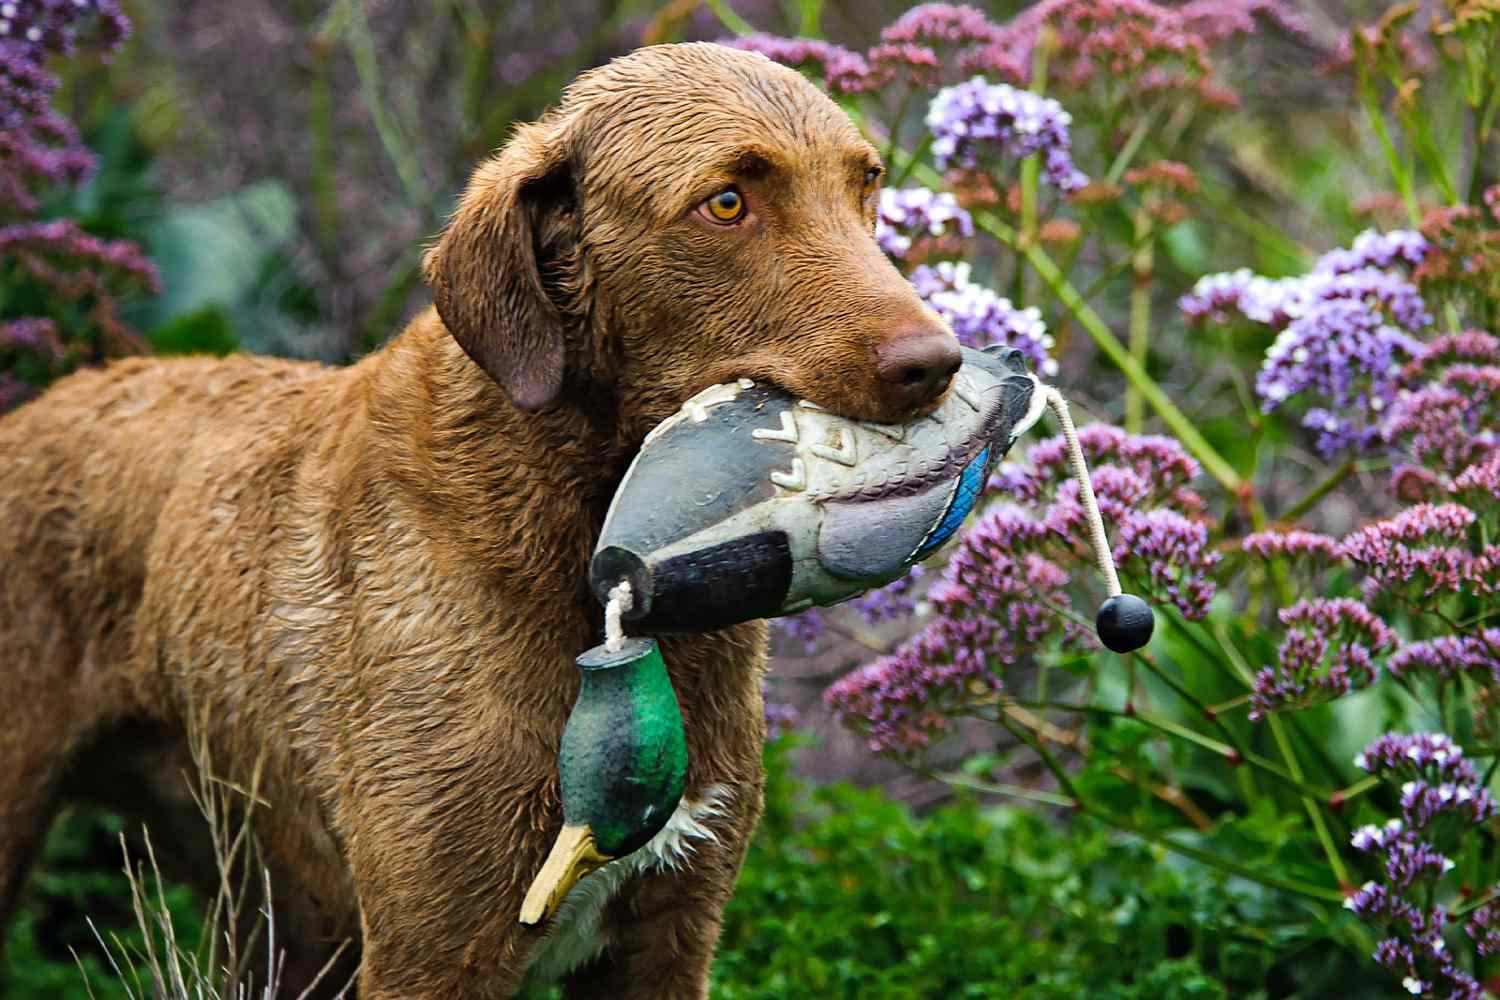 chesapeake bay retriever standing near purple flowers carrying a duck toy in her mouth